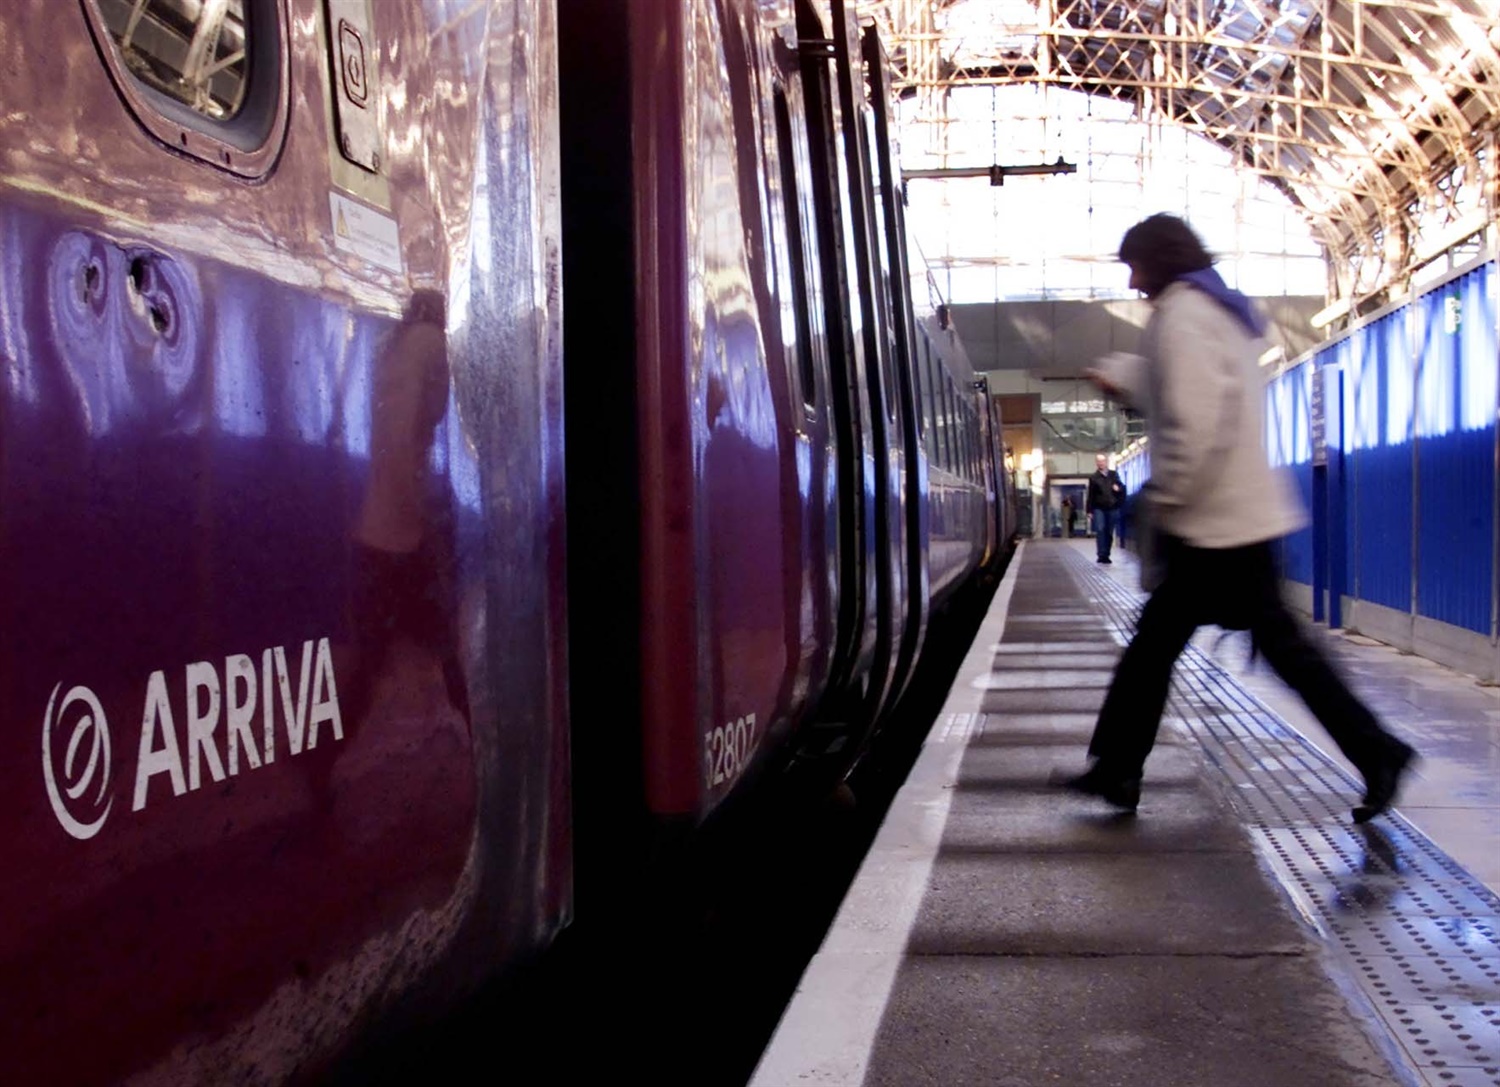 Arriva integration with Northern to face in-depth competition investigation